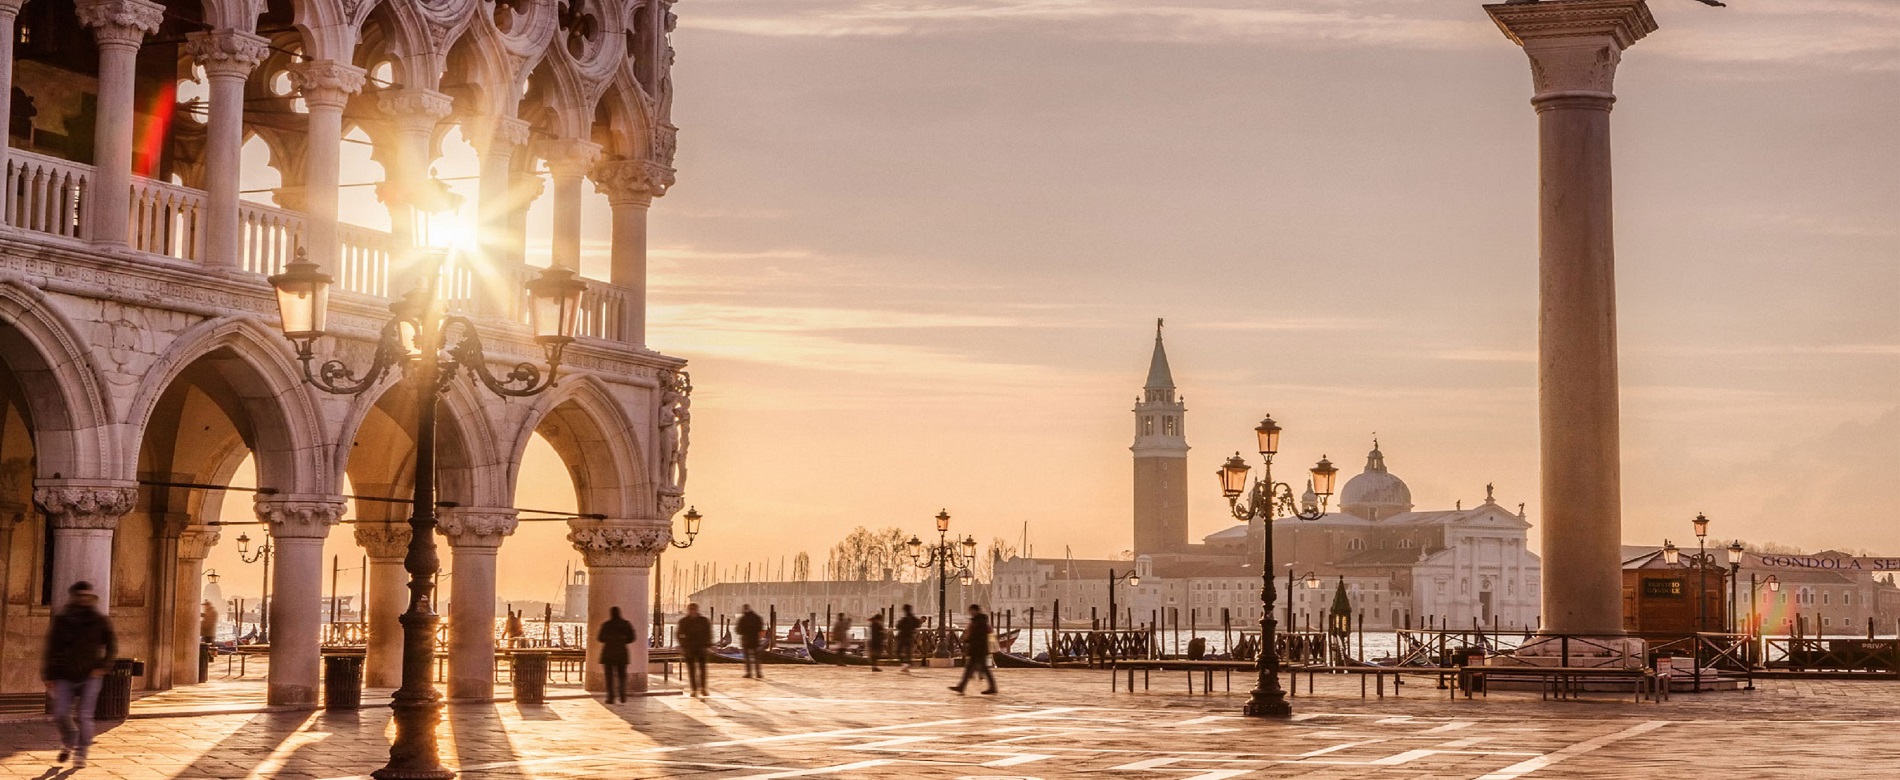 St. Mark's Square with lampposts and St. Mark's column in Venice.